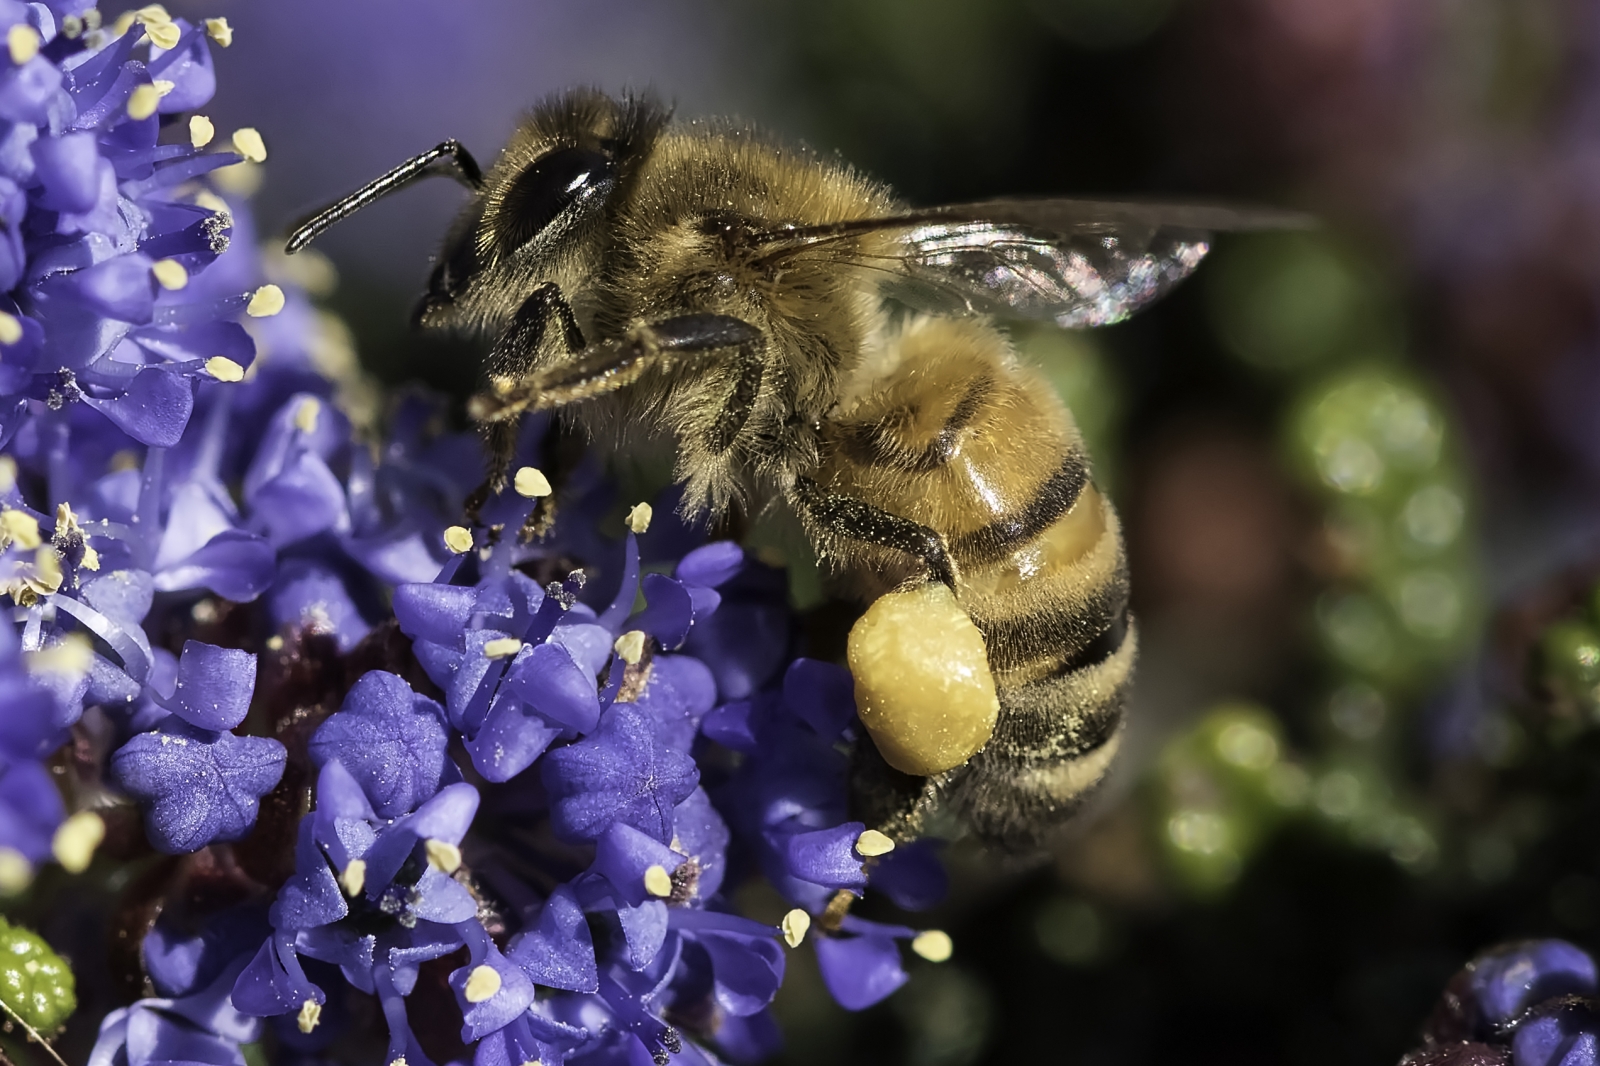 Honeybee (Apis mellifera) collects pollen to feed young in the hive.  Mixing grains with nectar, she brushes them to concave pollen baskets on her legs. Stiff hairs help hold the mix in place.